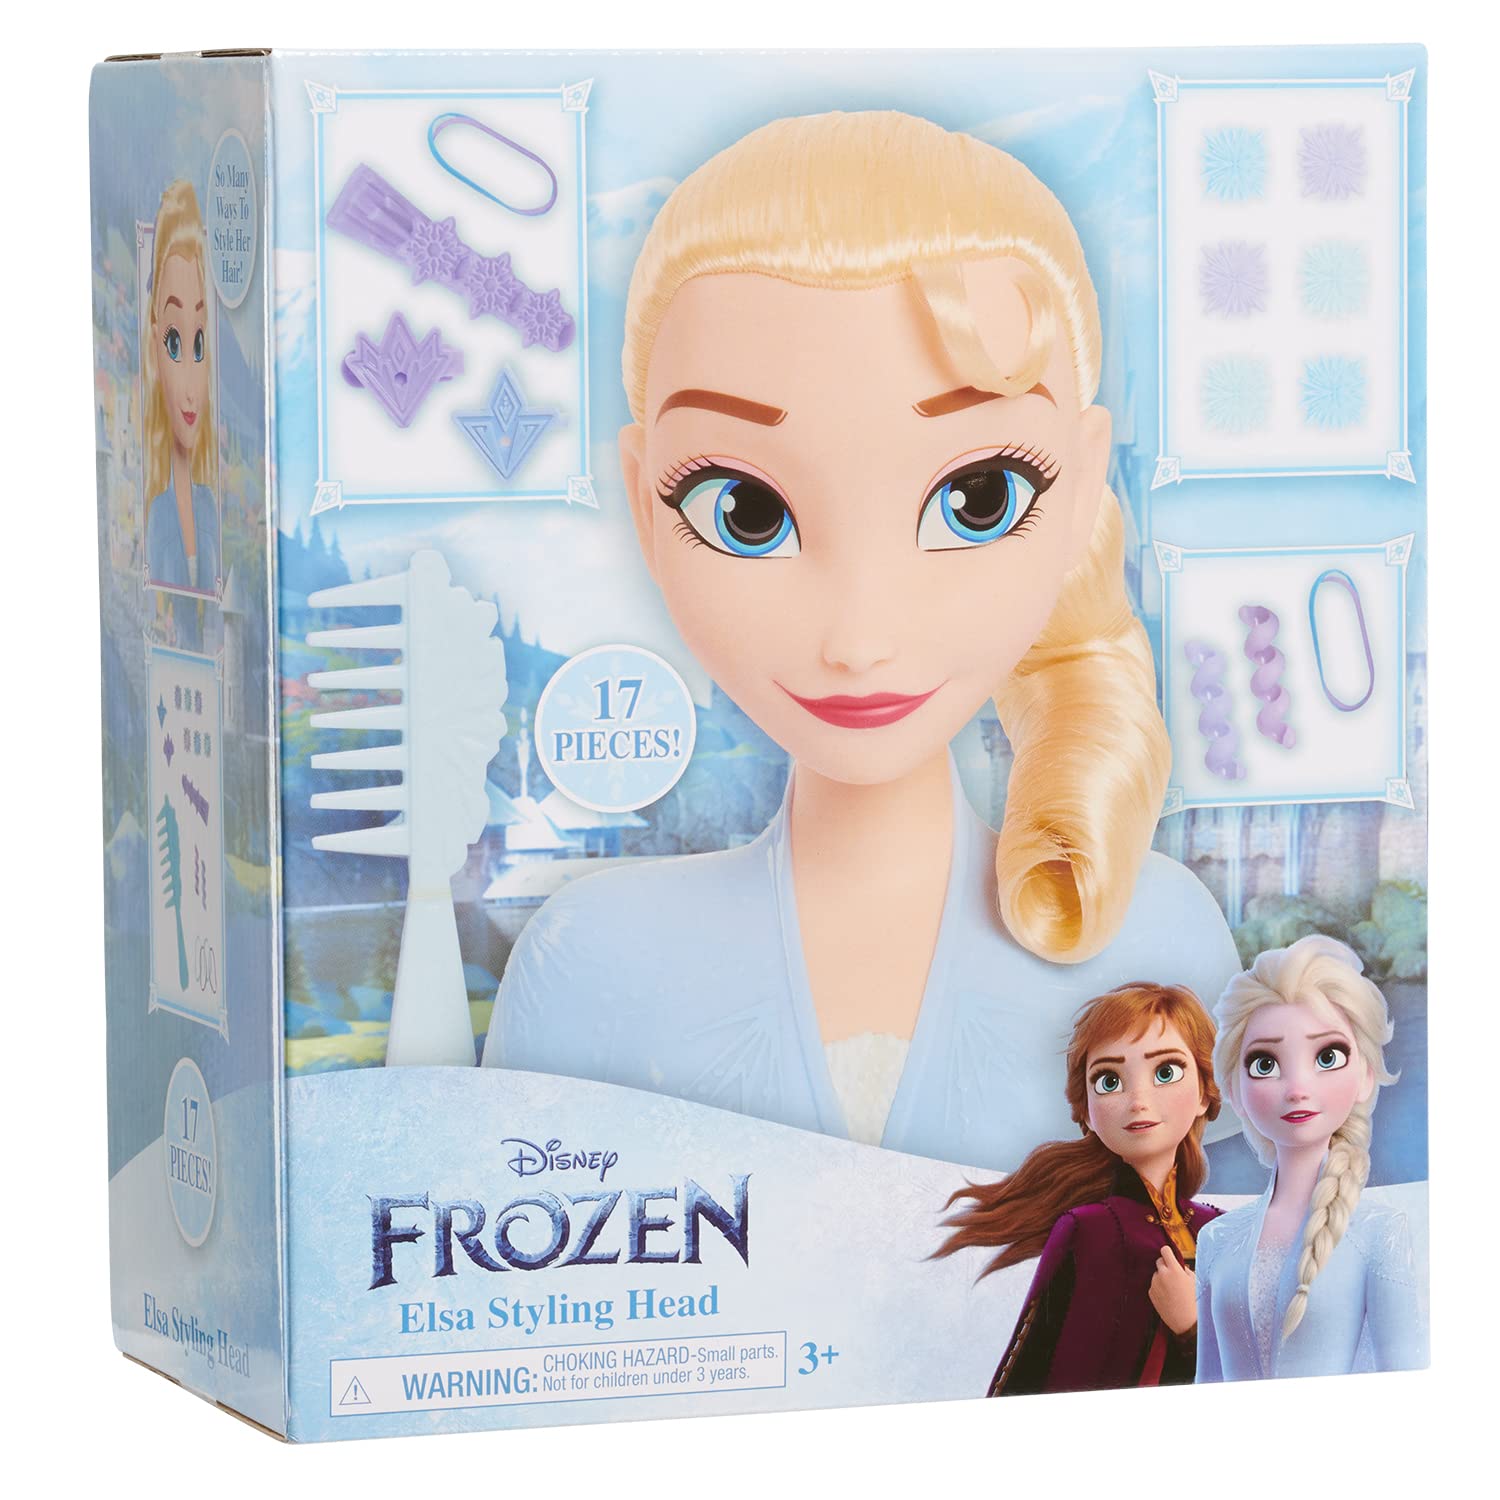 Disney Frozen 2 Elsa Styling Head, 17-Pieces Include Wear and Share Accessories, Blonde, Hair Styling for Kids, by Just Play